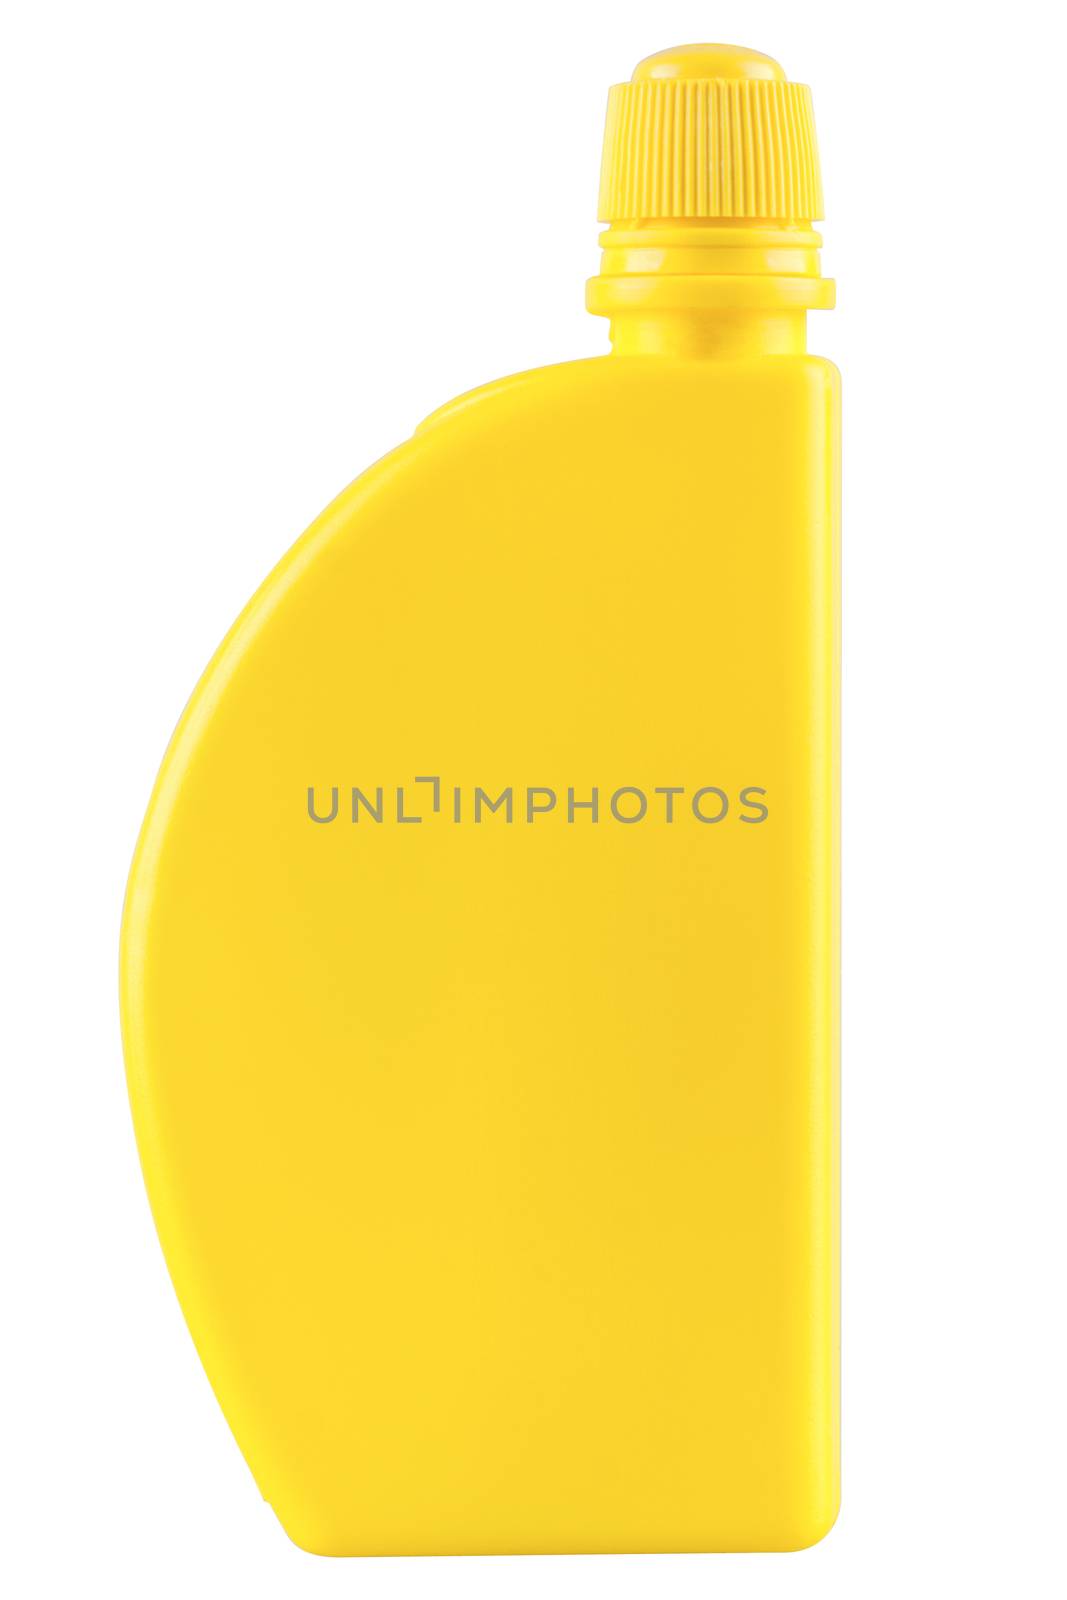 The yellow plastic container isolated on a white background